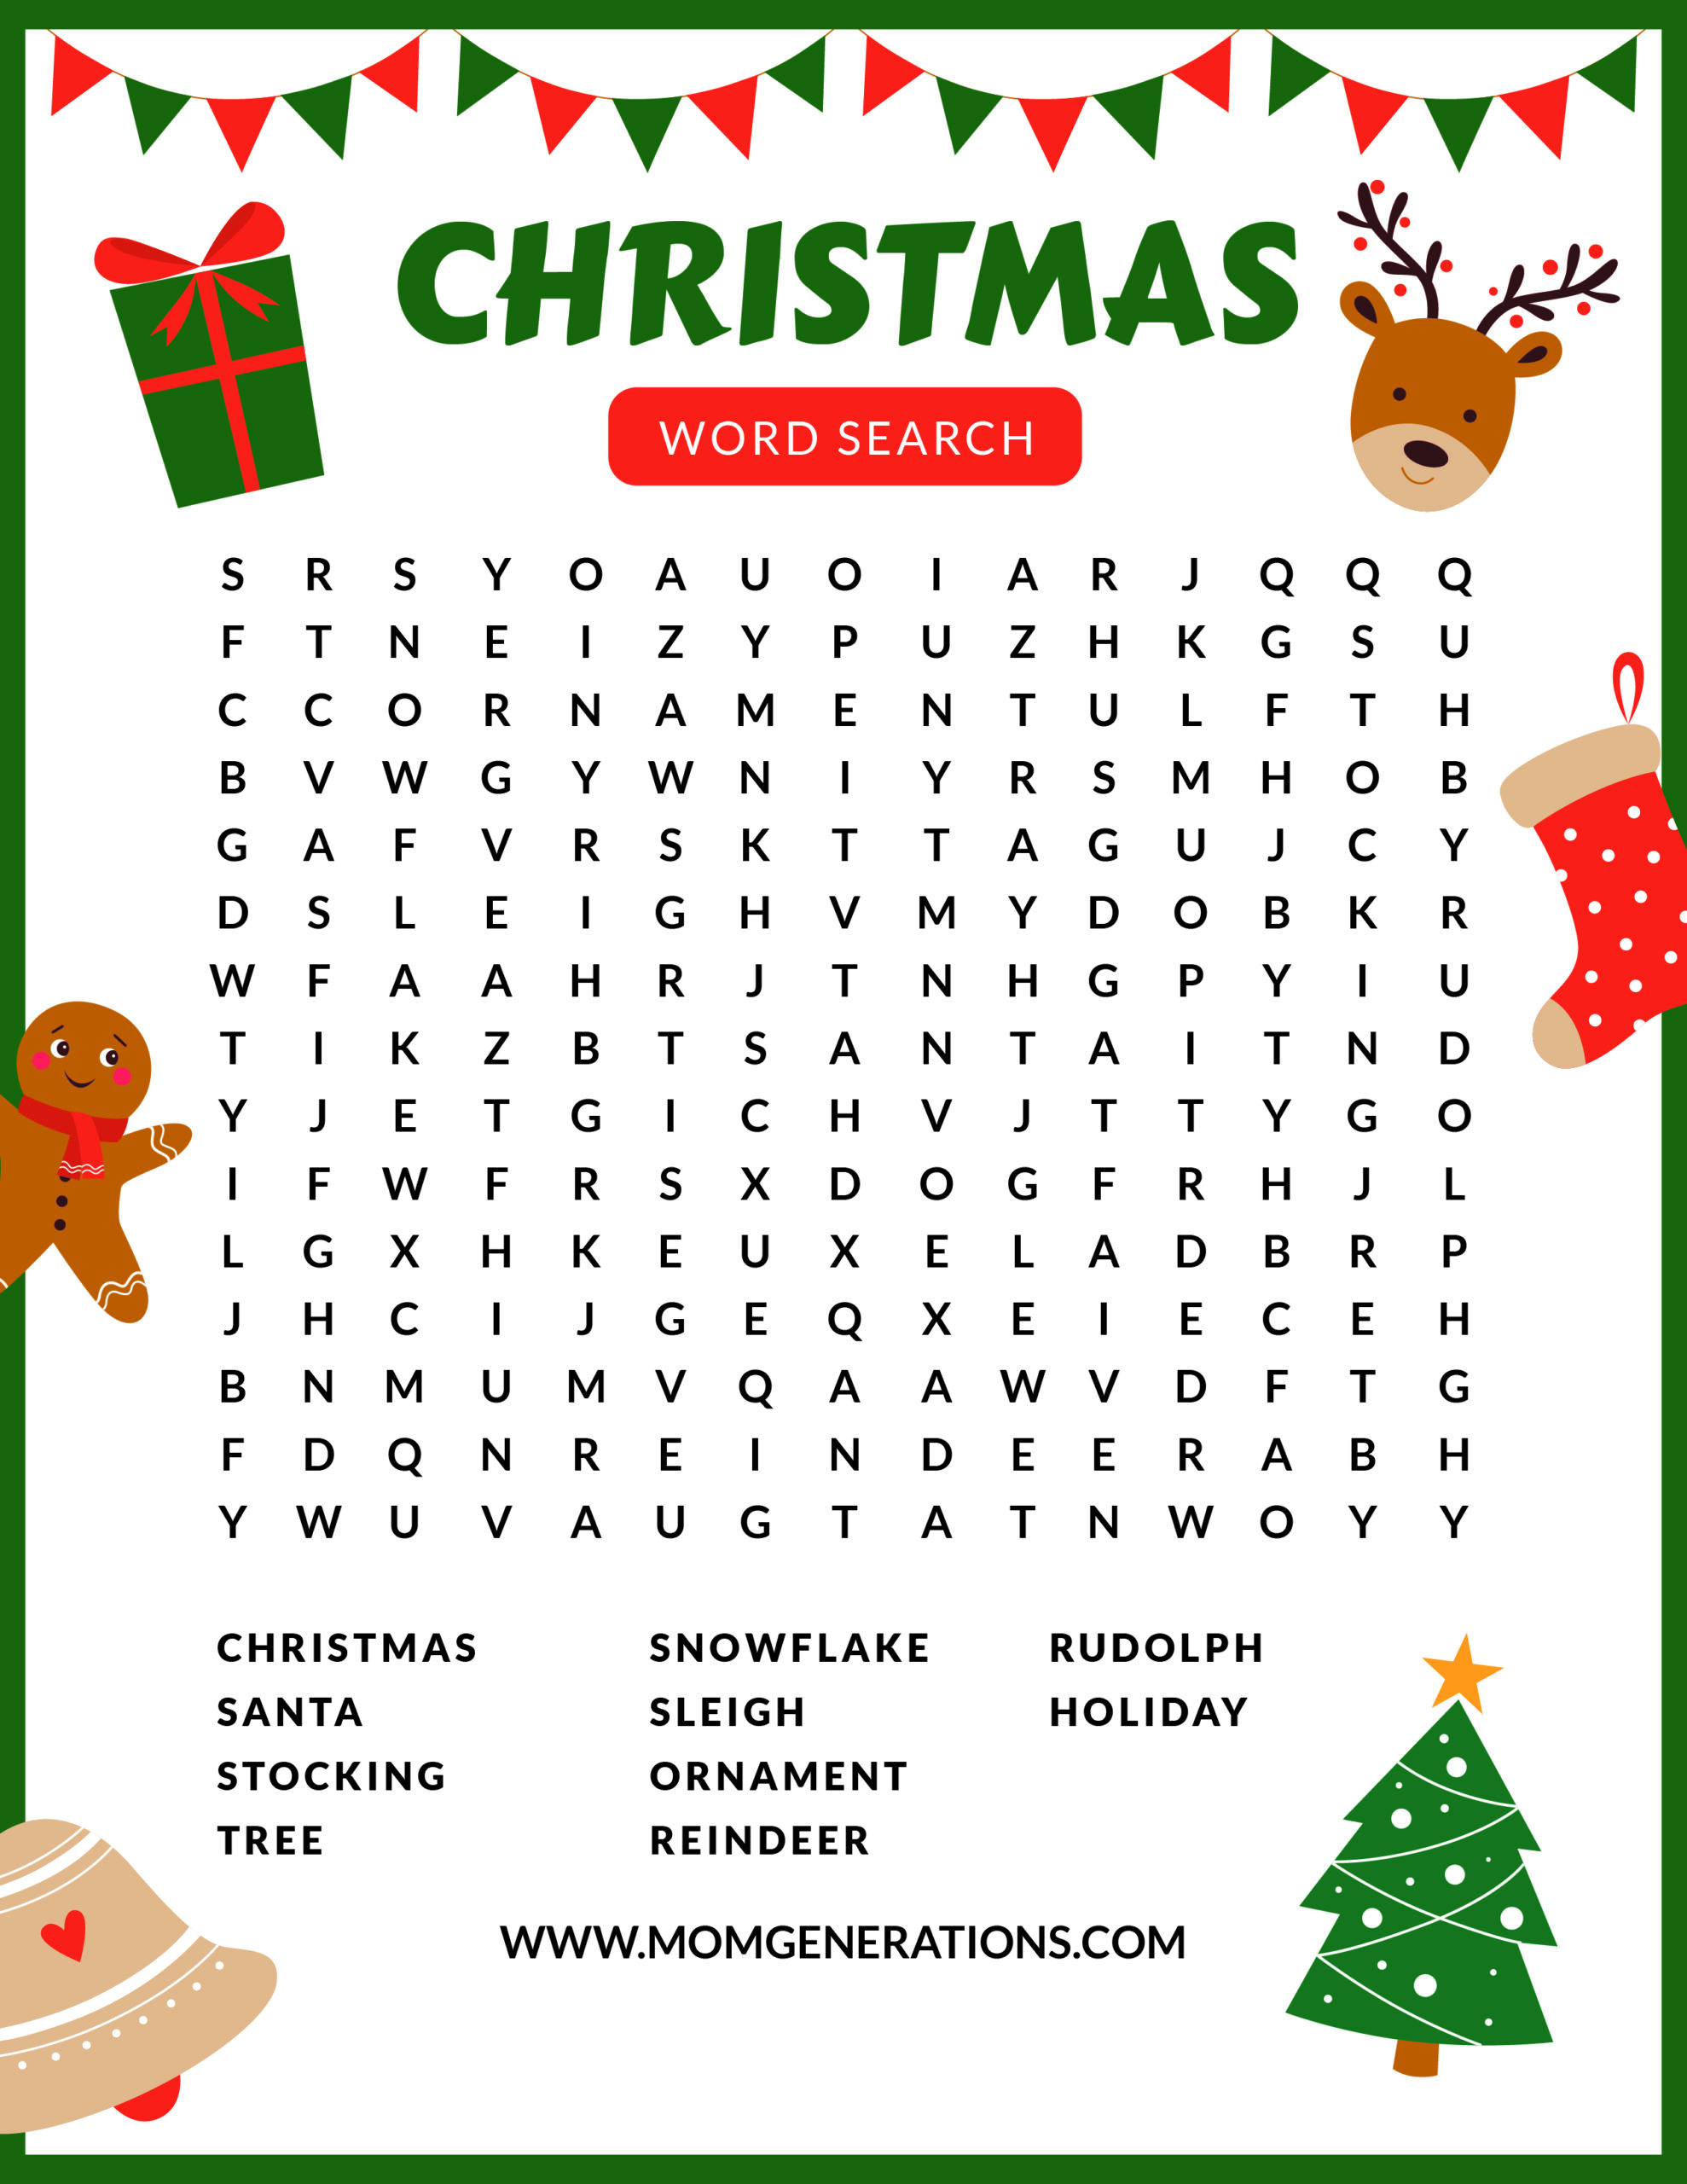 free-printable-christmas-word-search-hess-un-academy-6-best-images-of